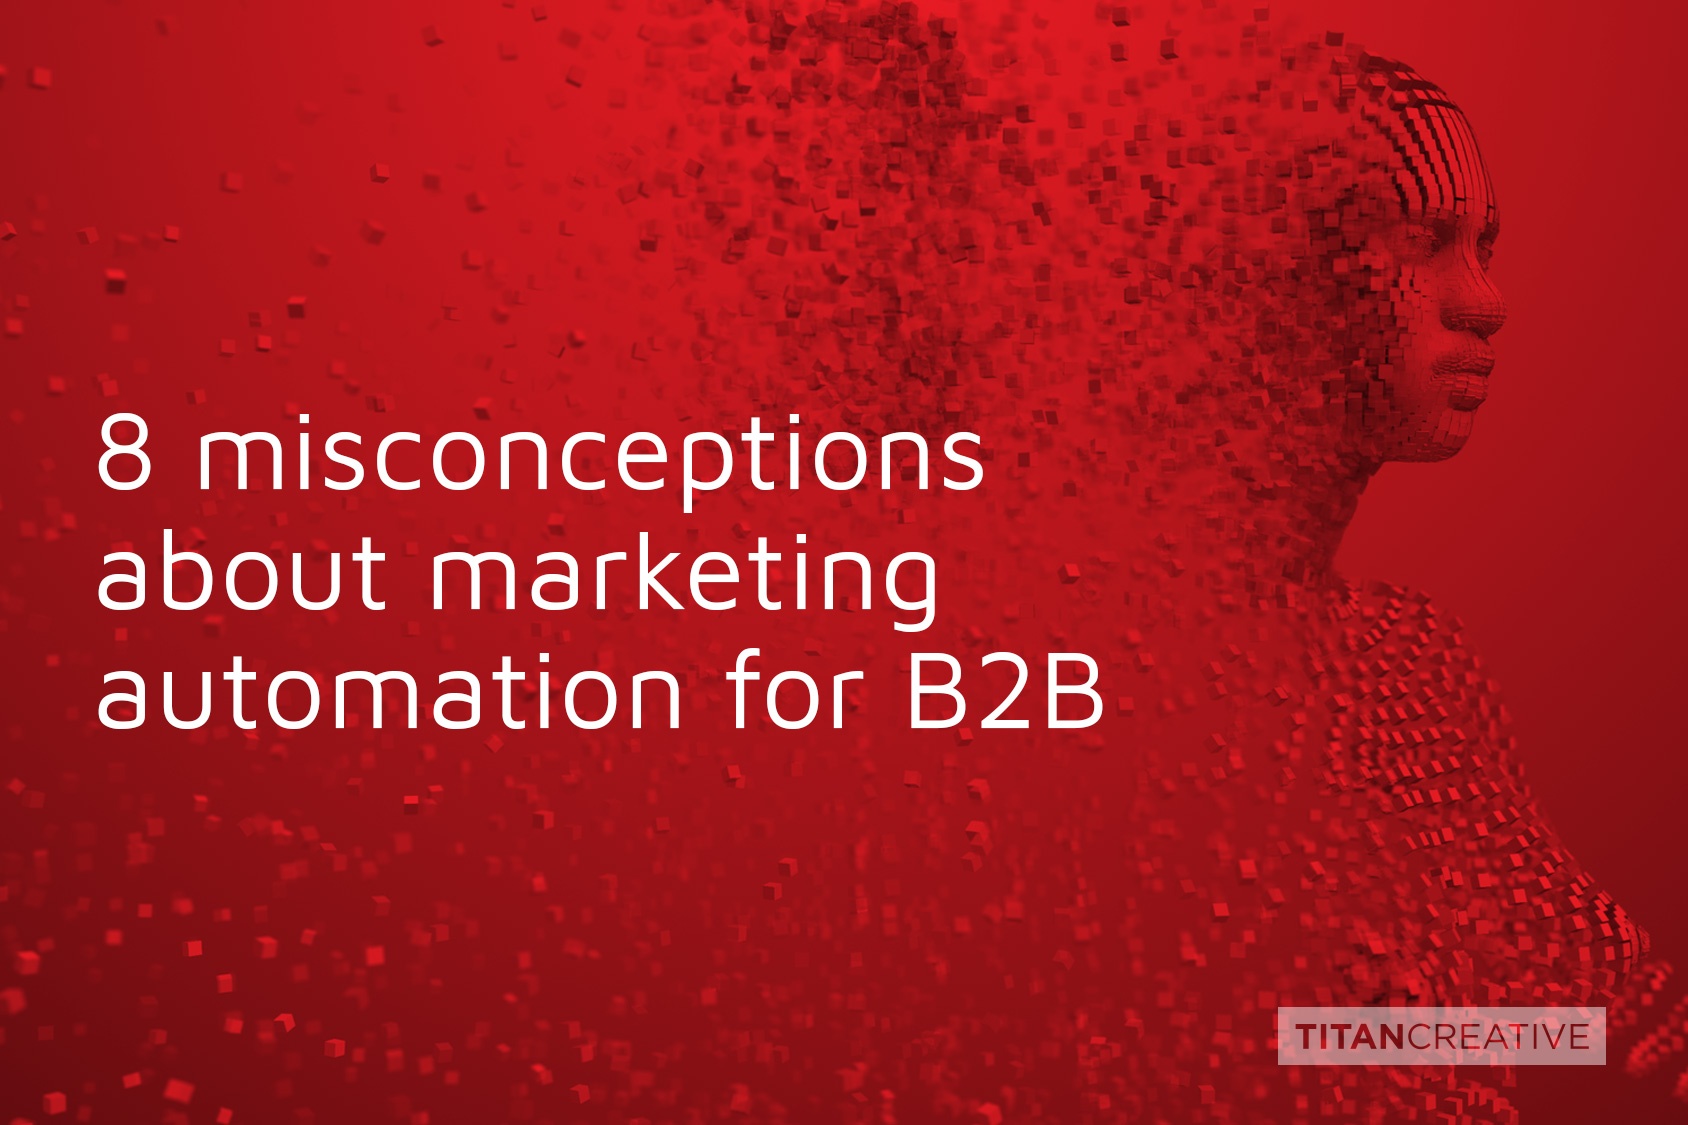 8 misconceptions about marketing automation for B2B.